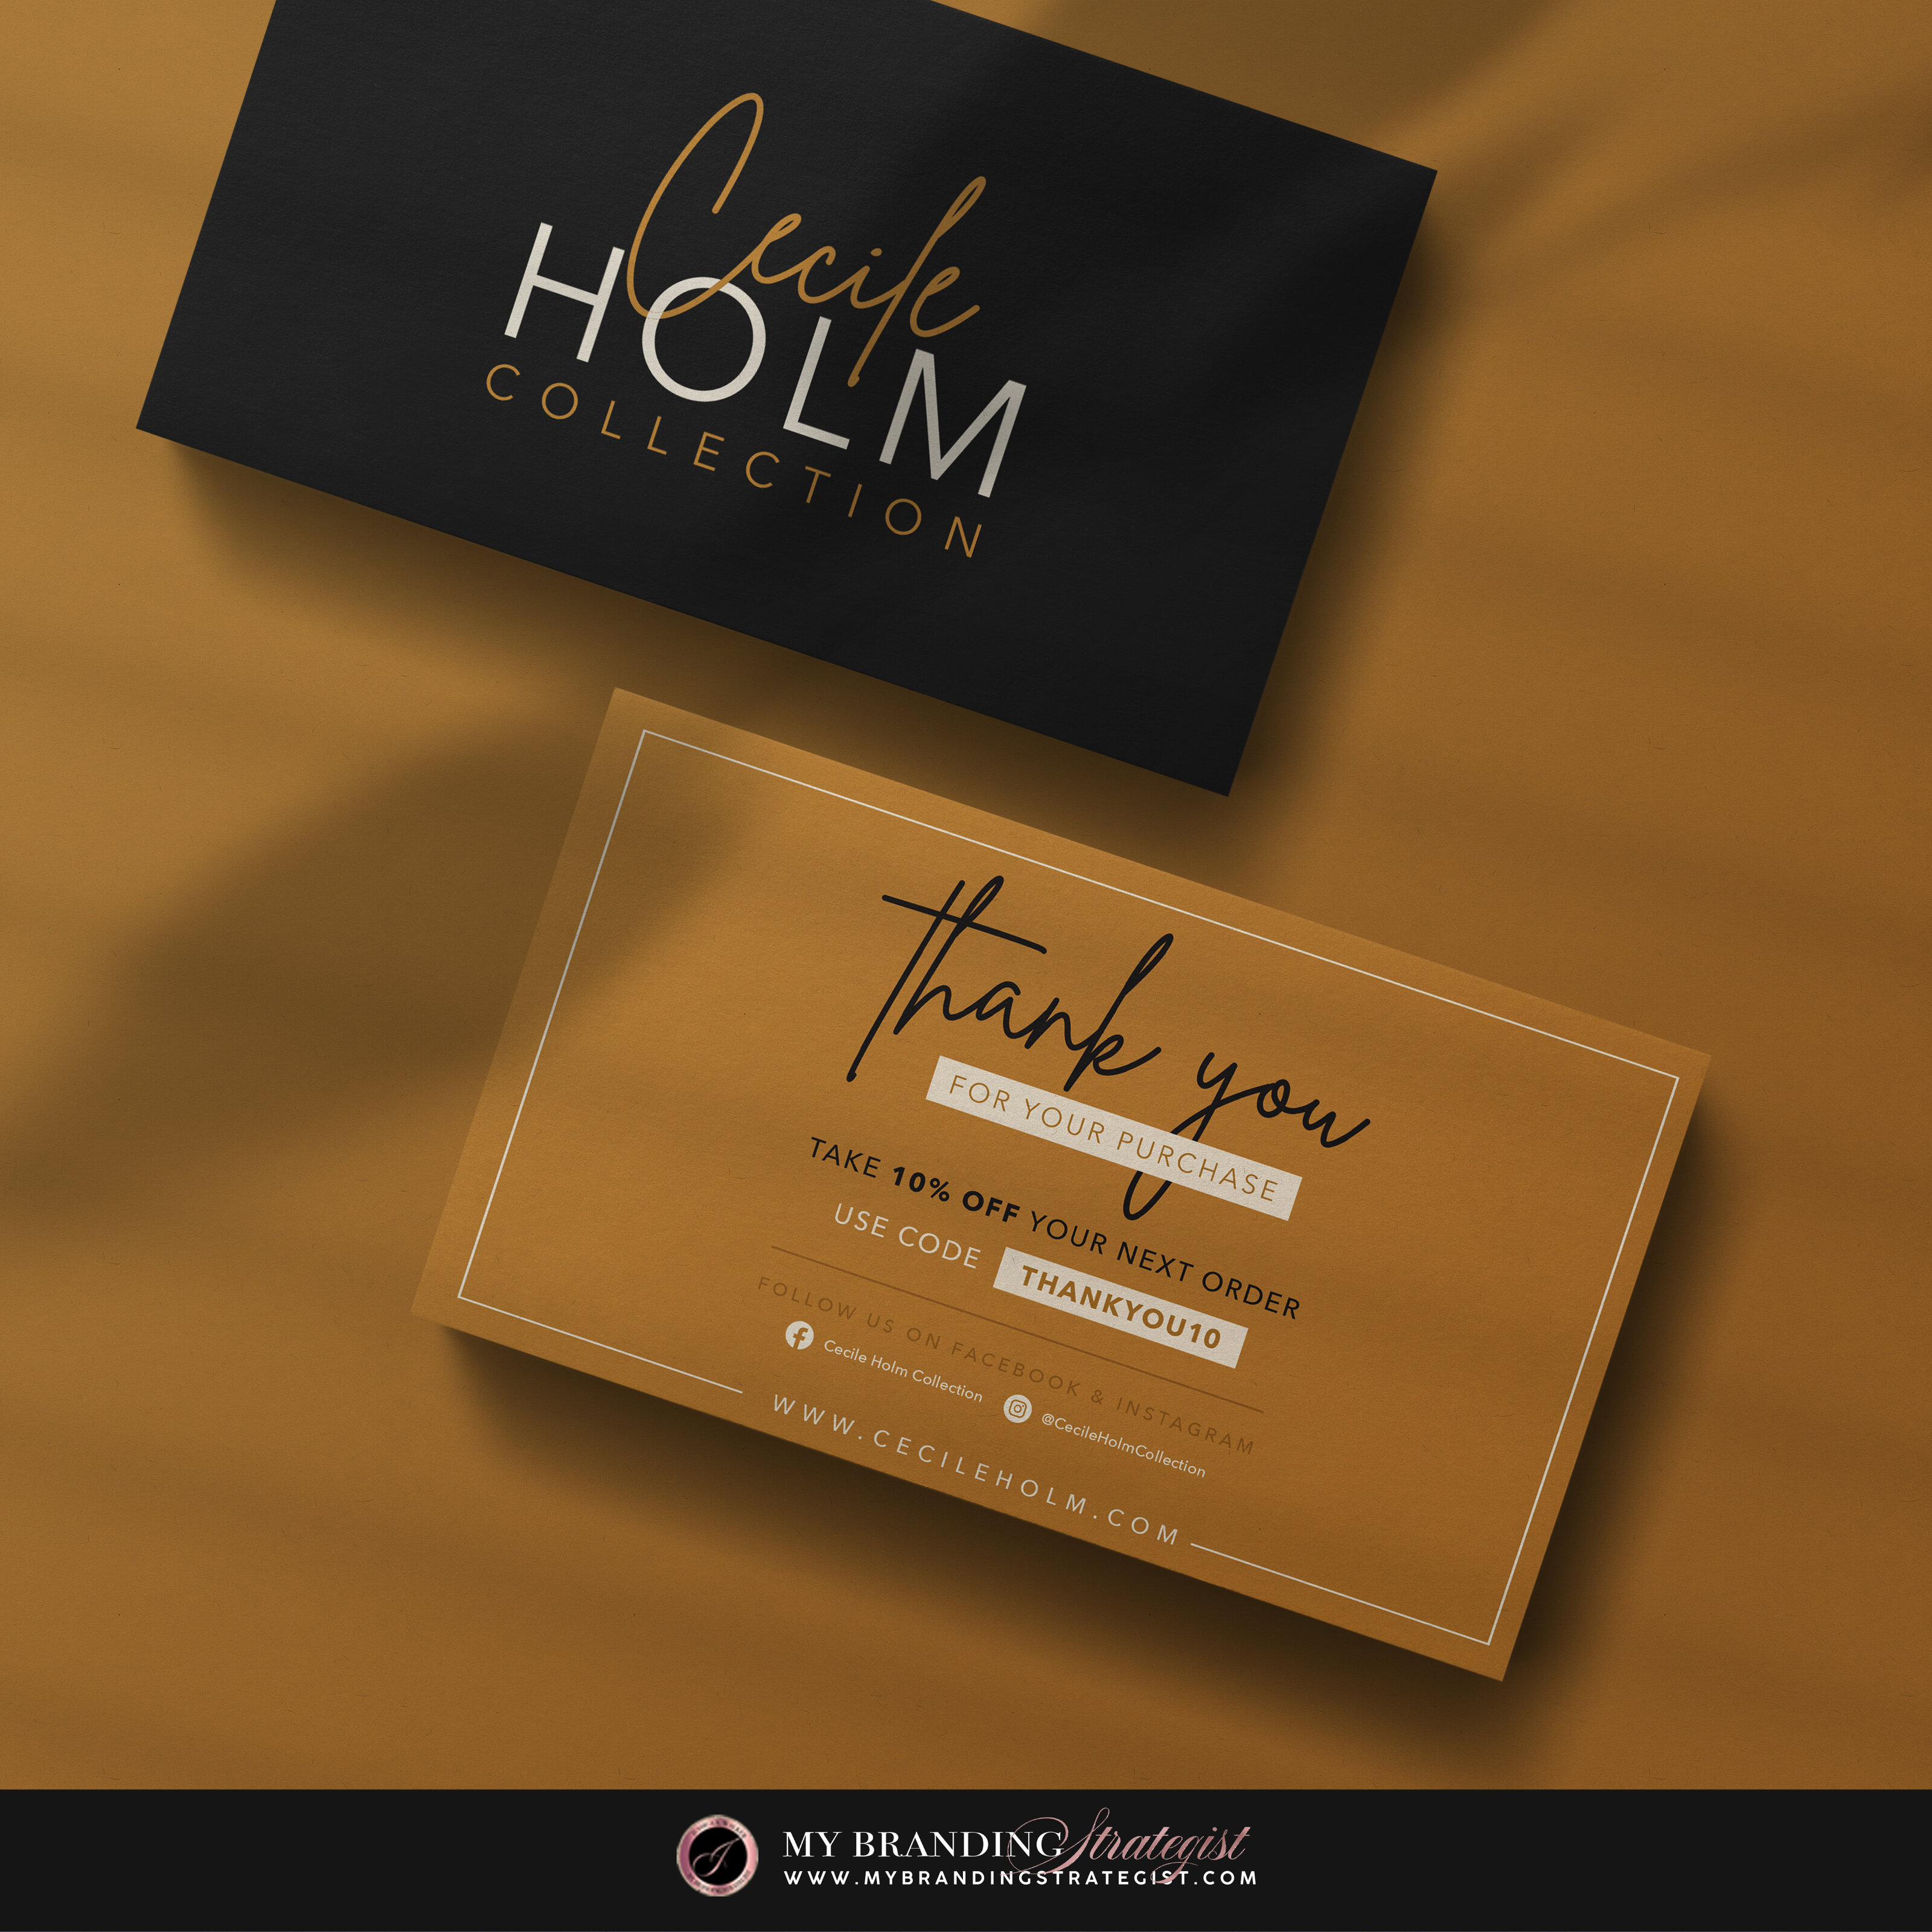 MOCKUP - Thank You Card - CECILE HOLM